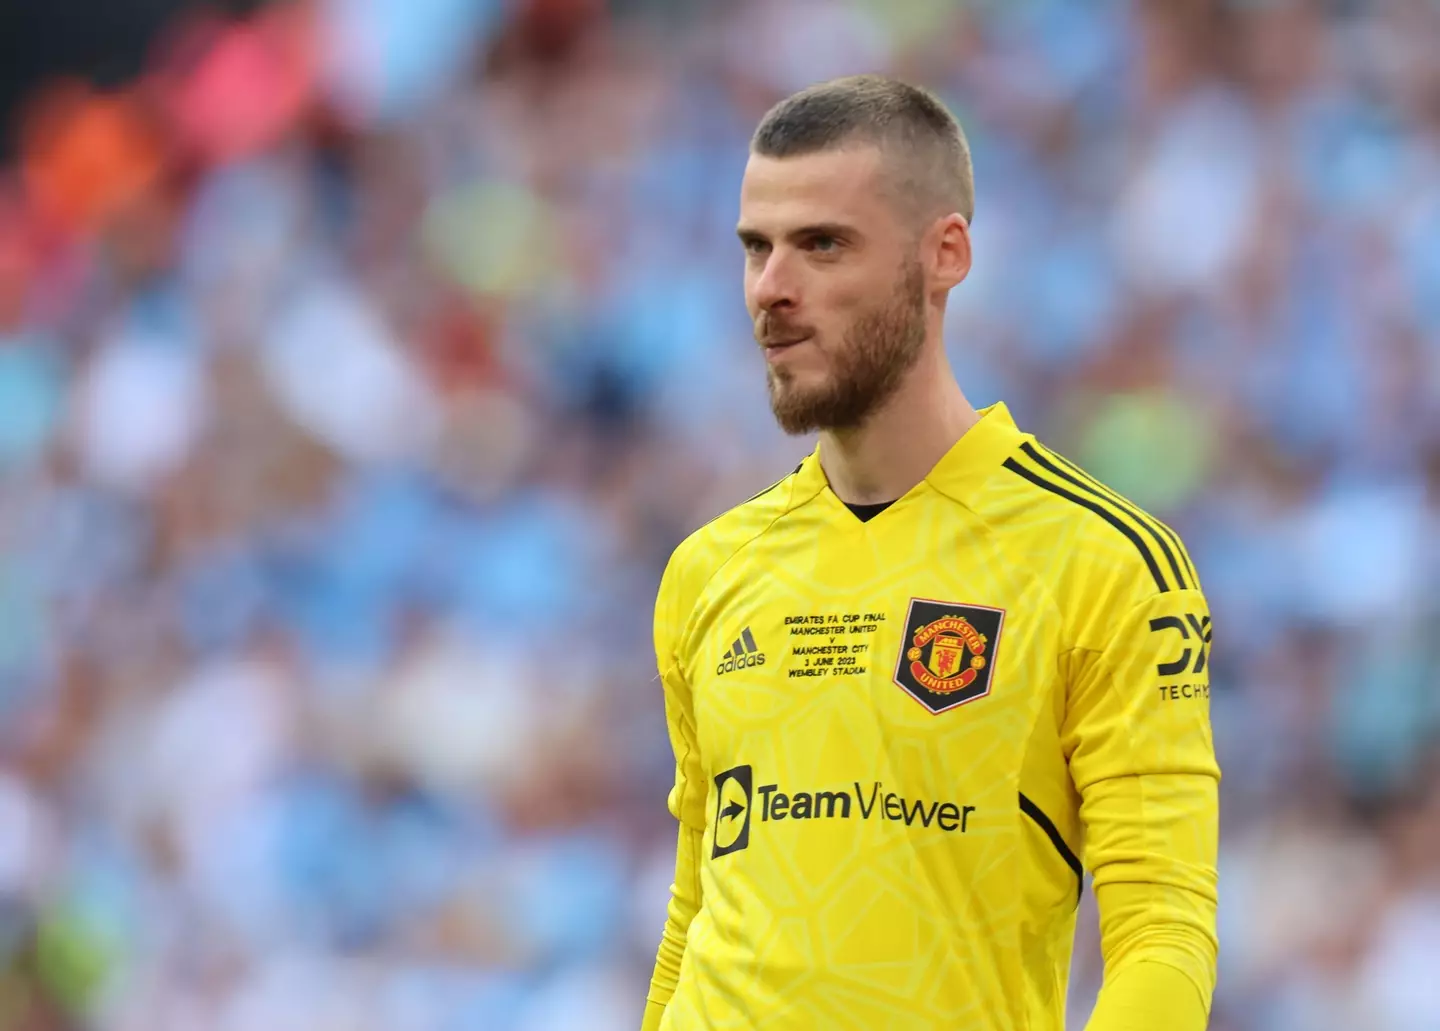 David de Gea in action for Manchester United. Image: Alamy